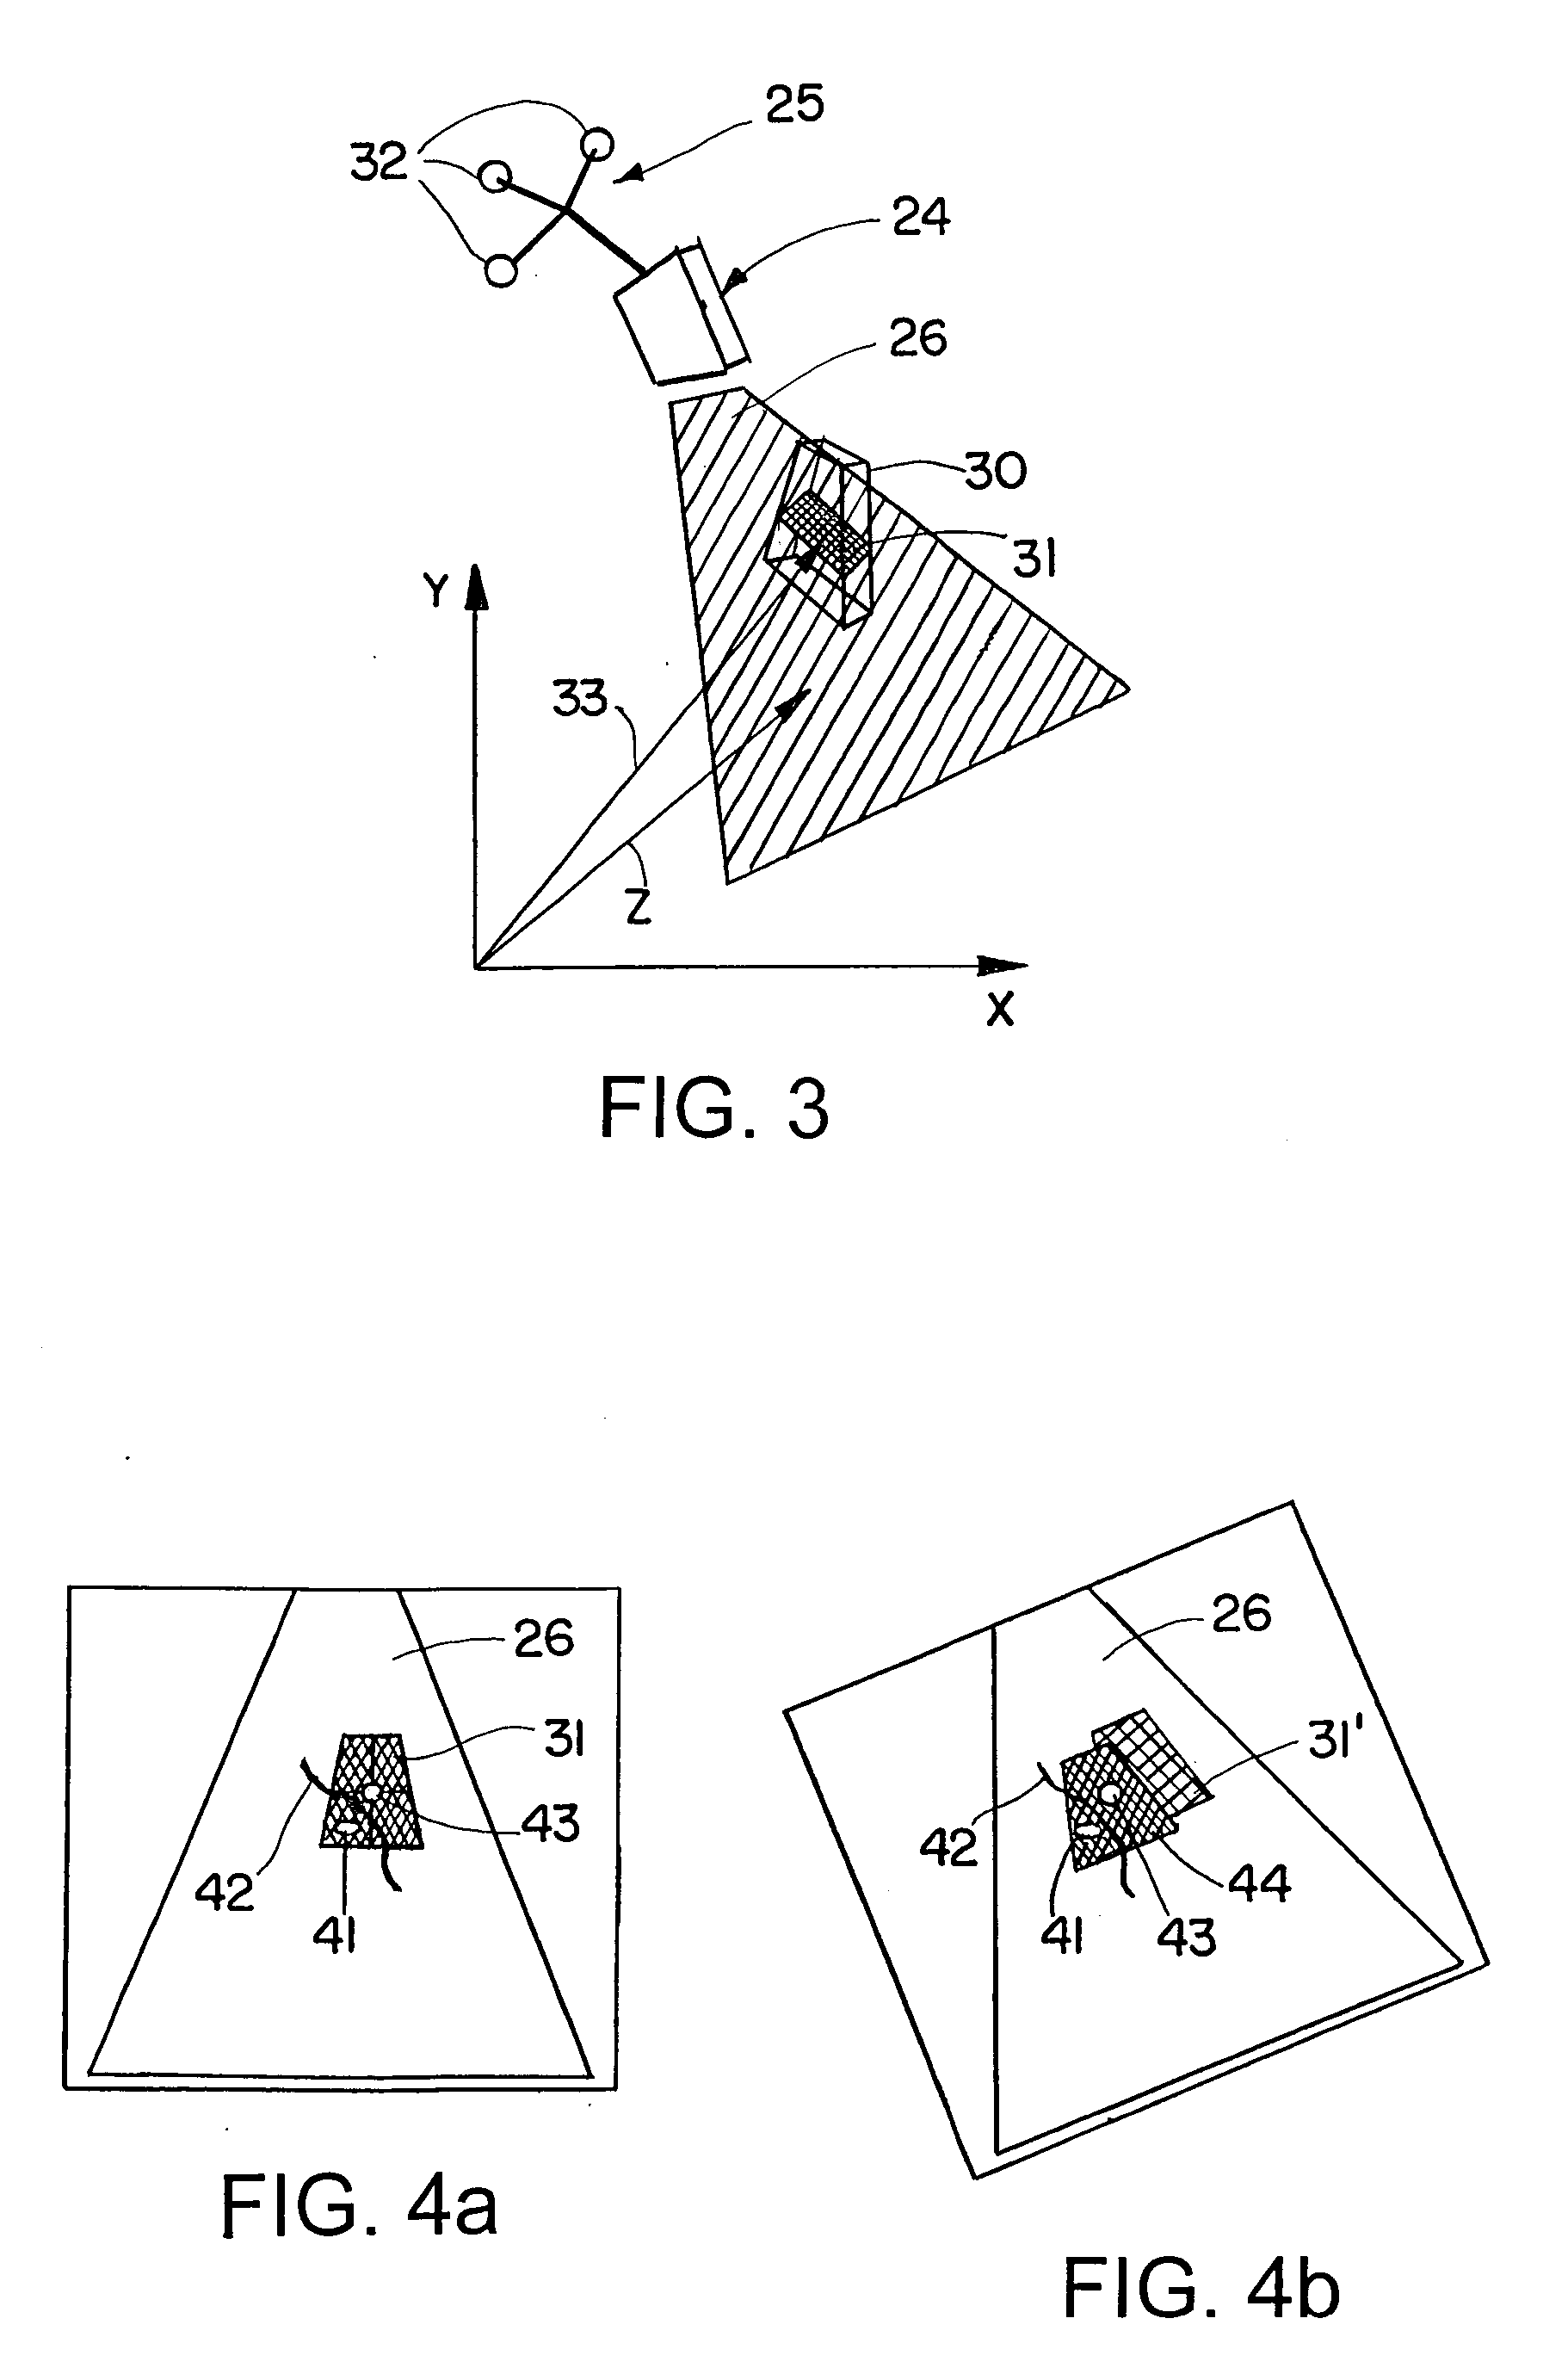 Displaying anatomical patient structures in a region of interest of an image detection apparatus